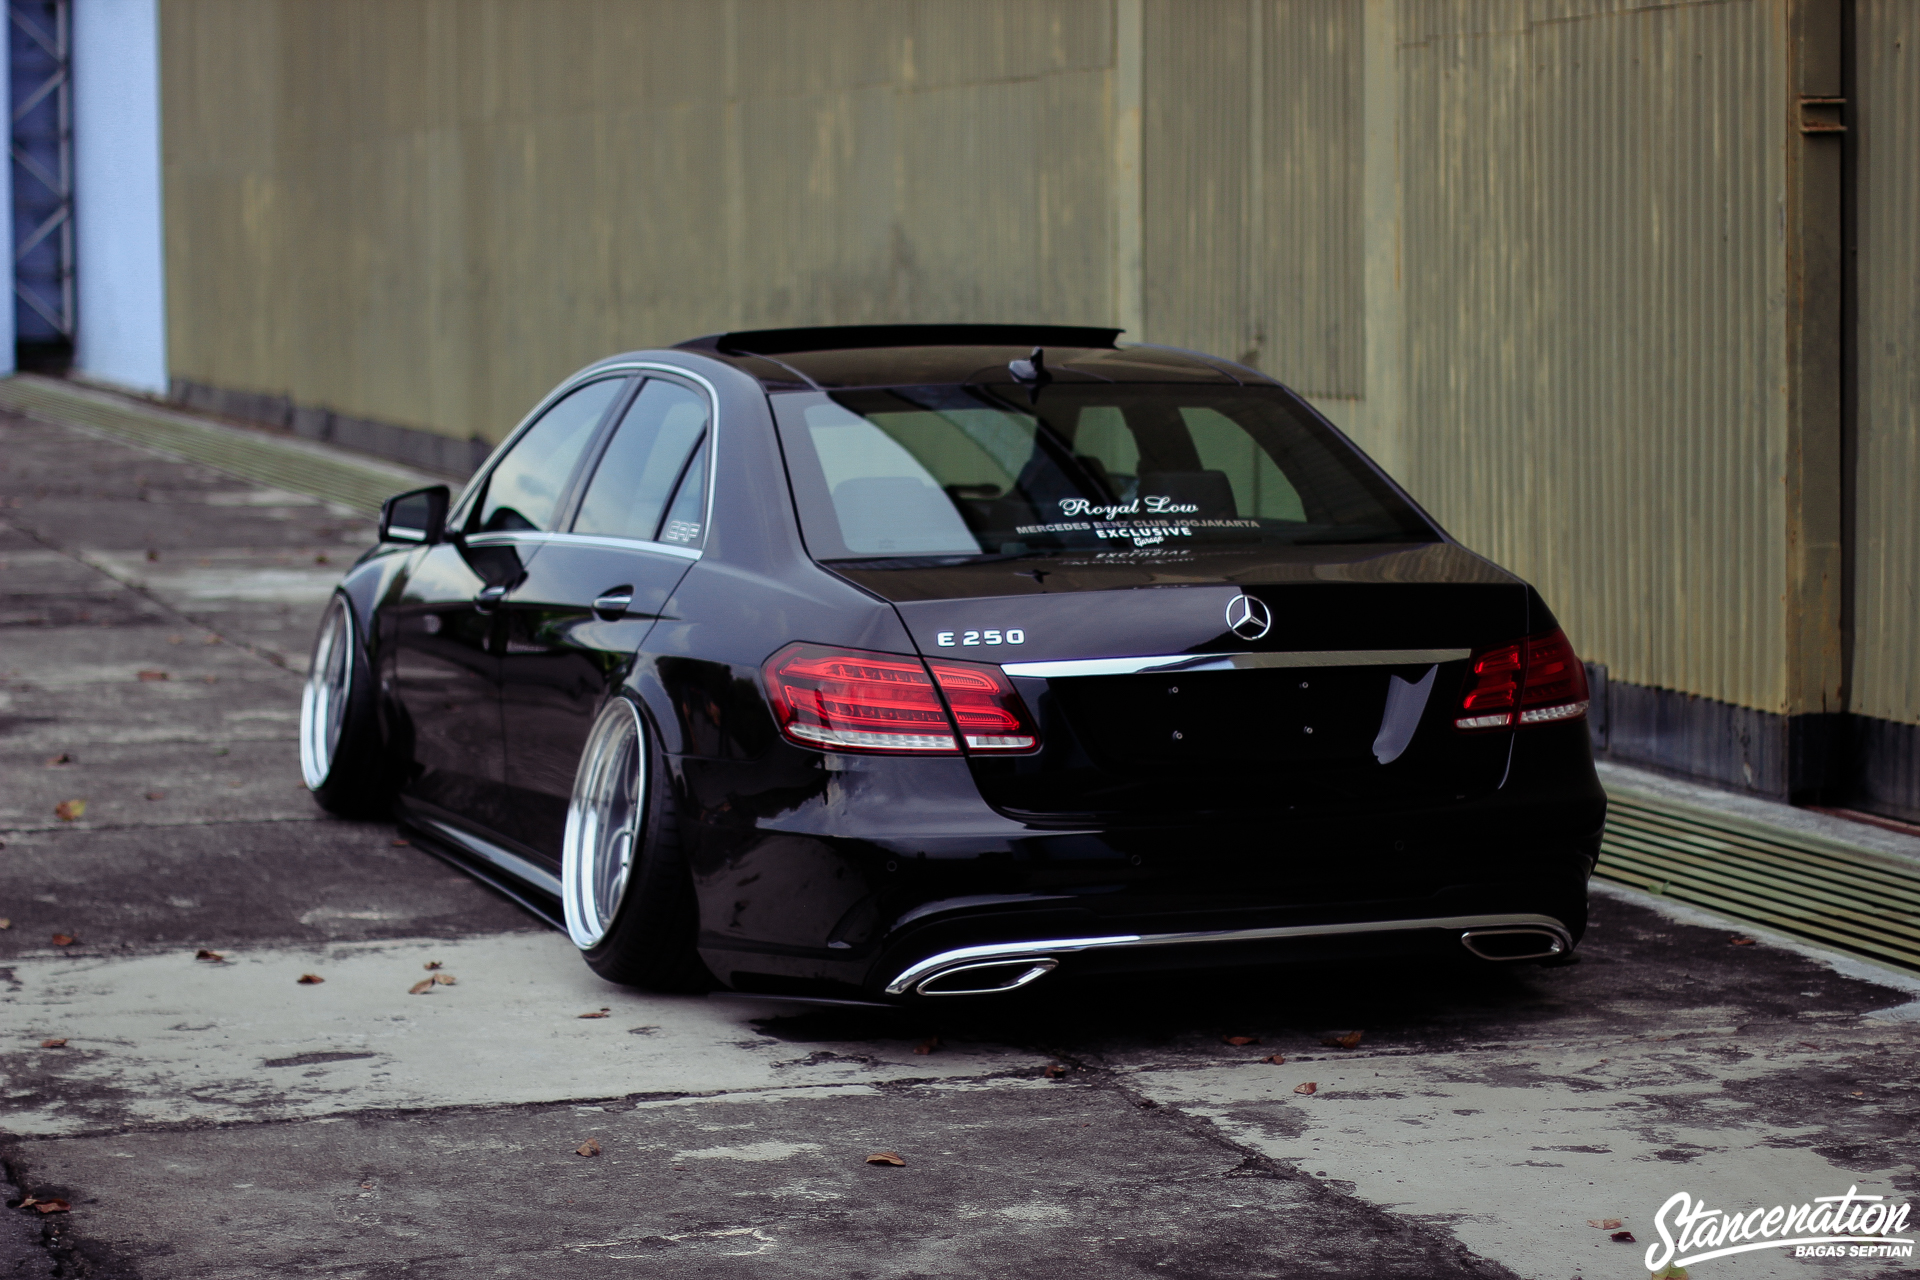 Bookkeeper build up During ~ Staying the Course // Chandra Kenzo's Mercedes-Benz E250. | StanceNation™  // Form > Function